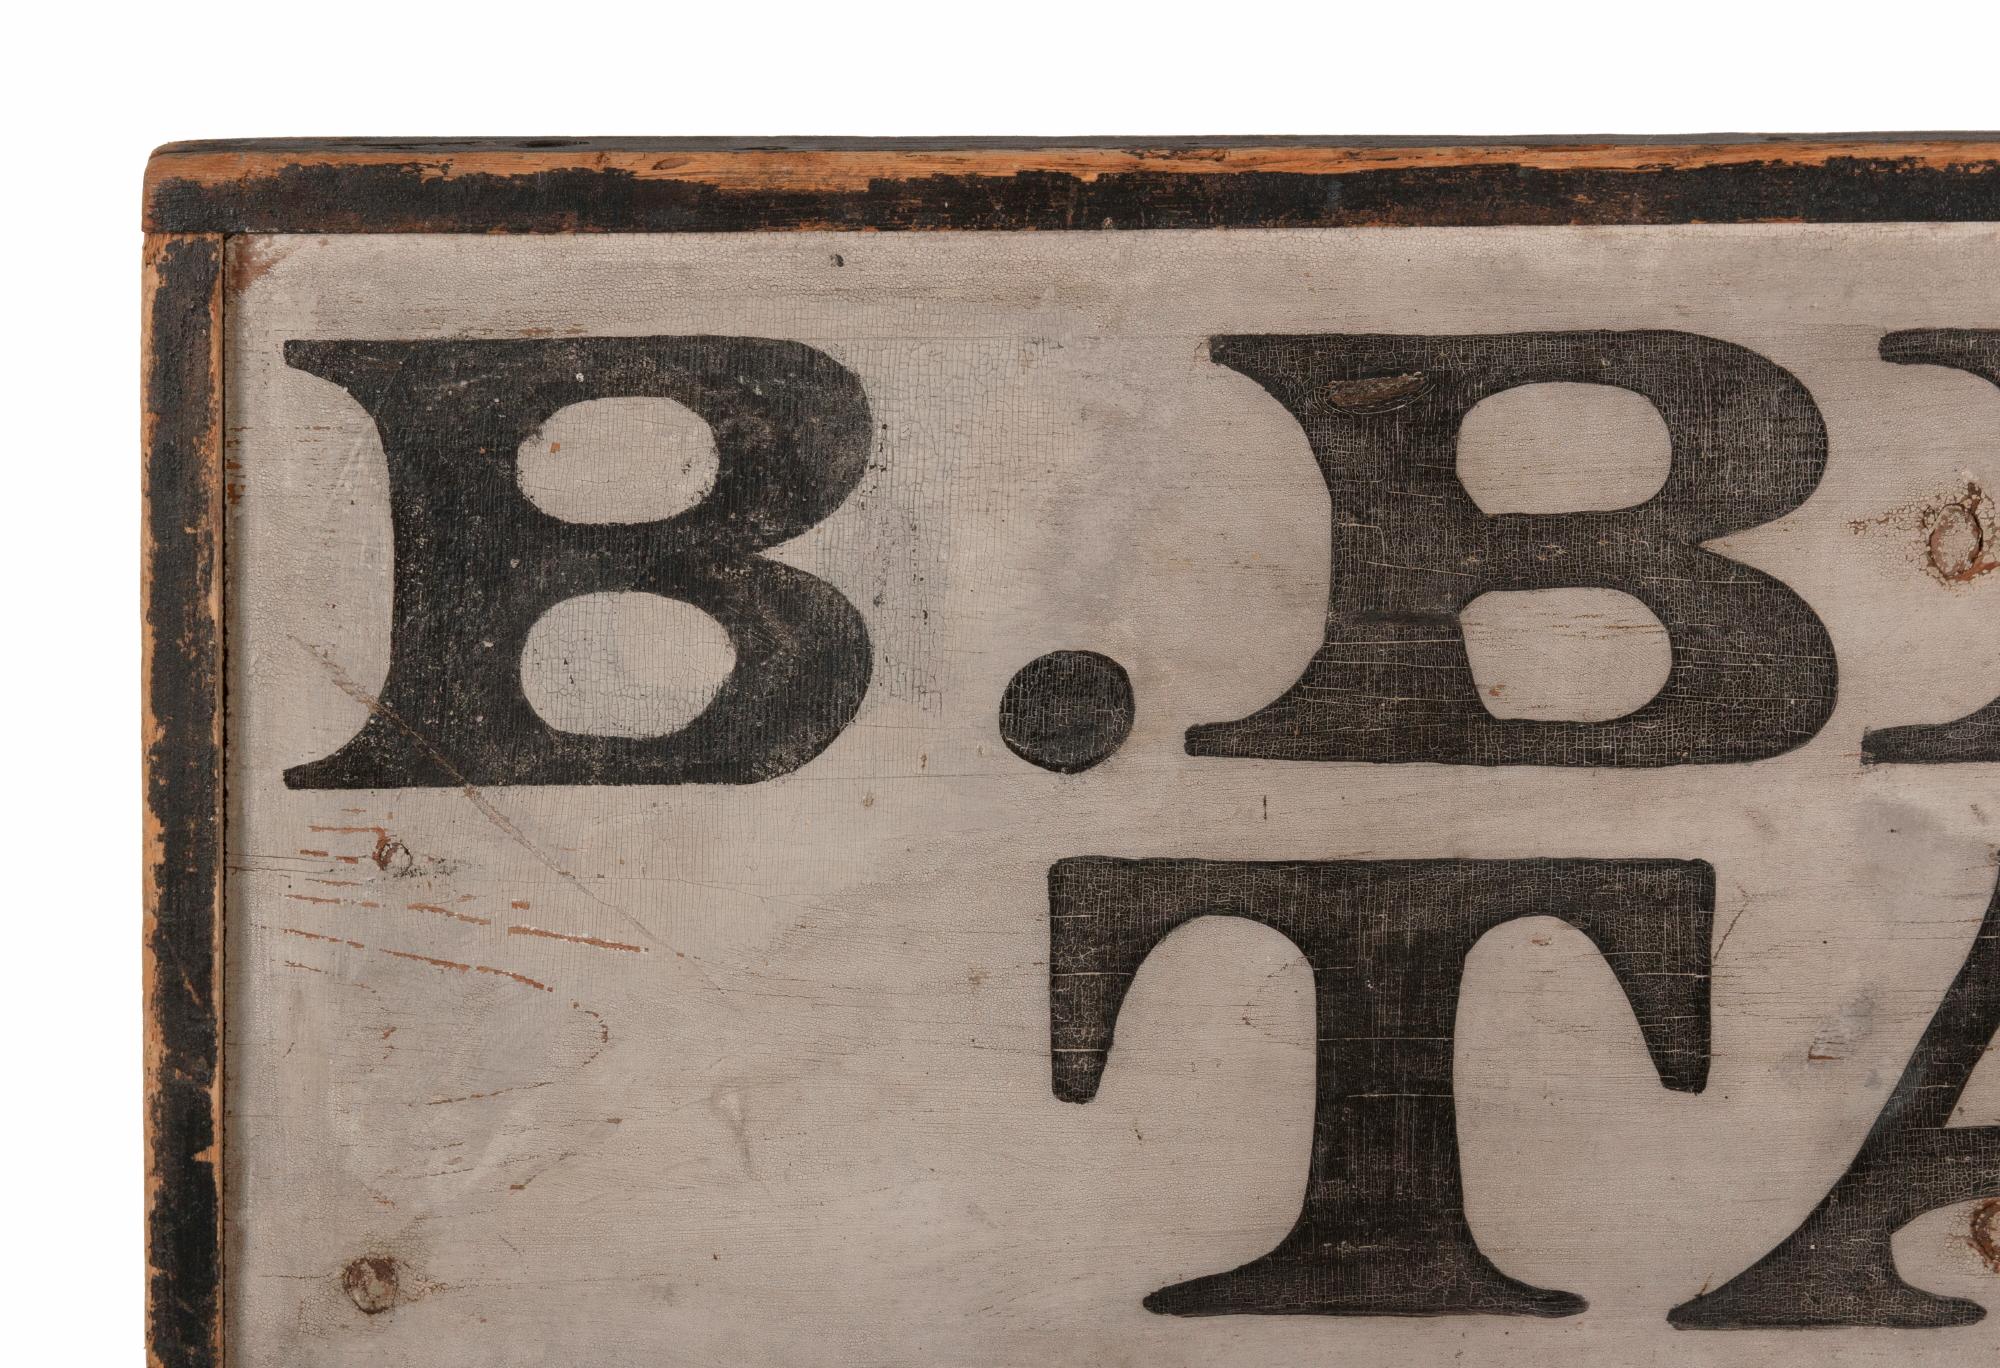 Early American trade sign: “B. BRISCOE, TAILOR,” circa 1810-1850, with a backwards “S” and extraordinary surface

Early, painted, American trade sign, made of pine, with a molded edge, applied with “T”-head nails. In very dark green, almost black,